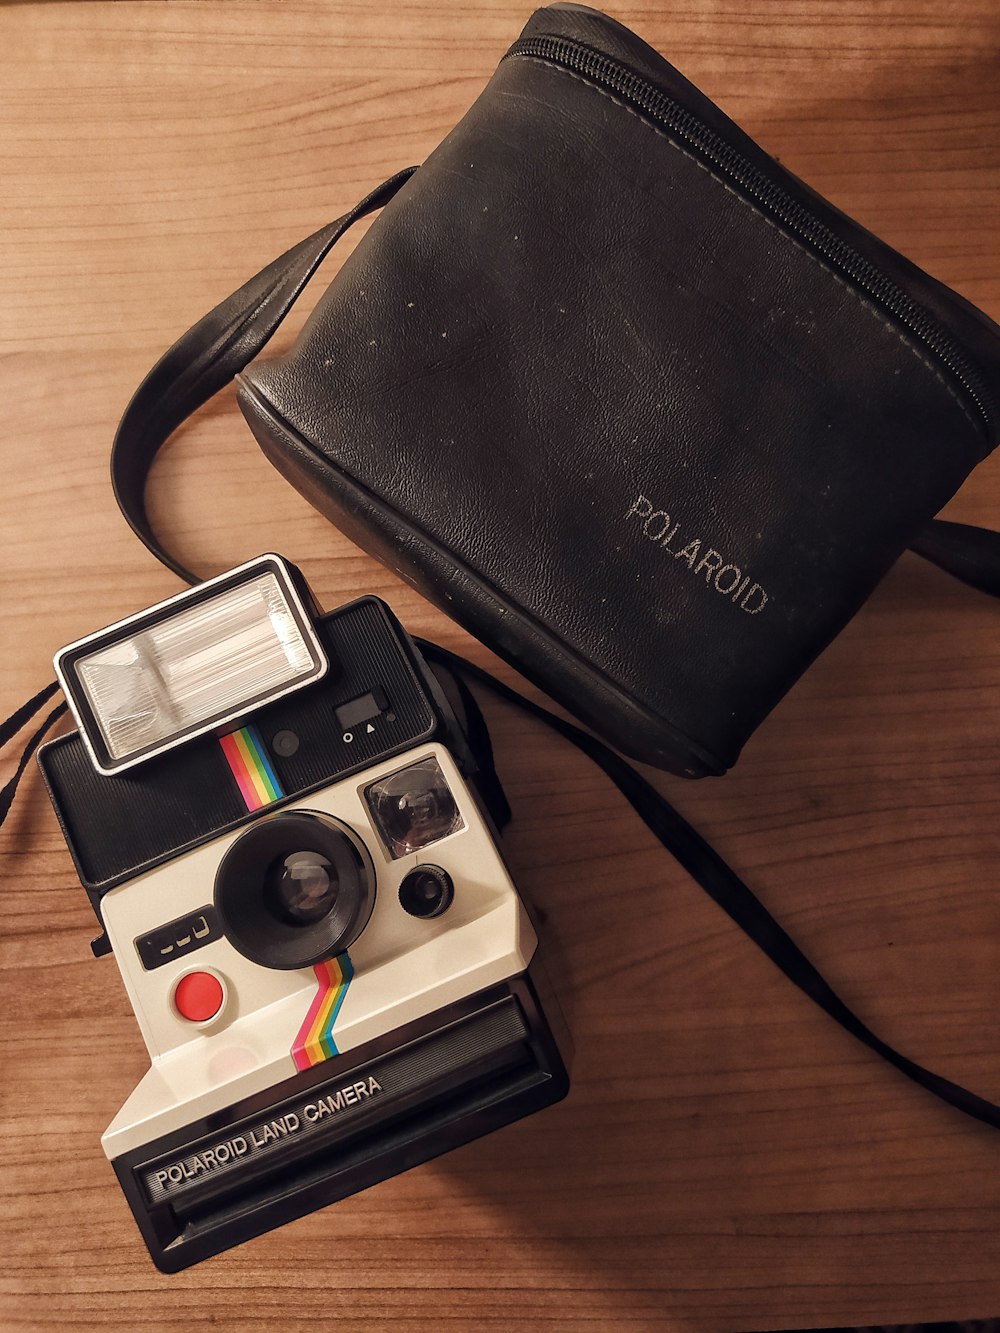 black and white polaroid camera beside black leather bifold wallet